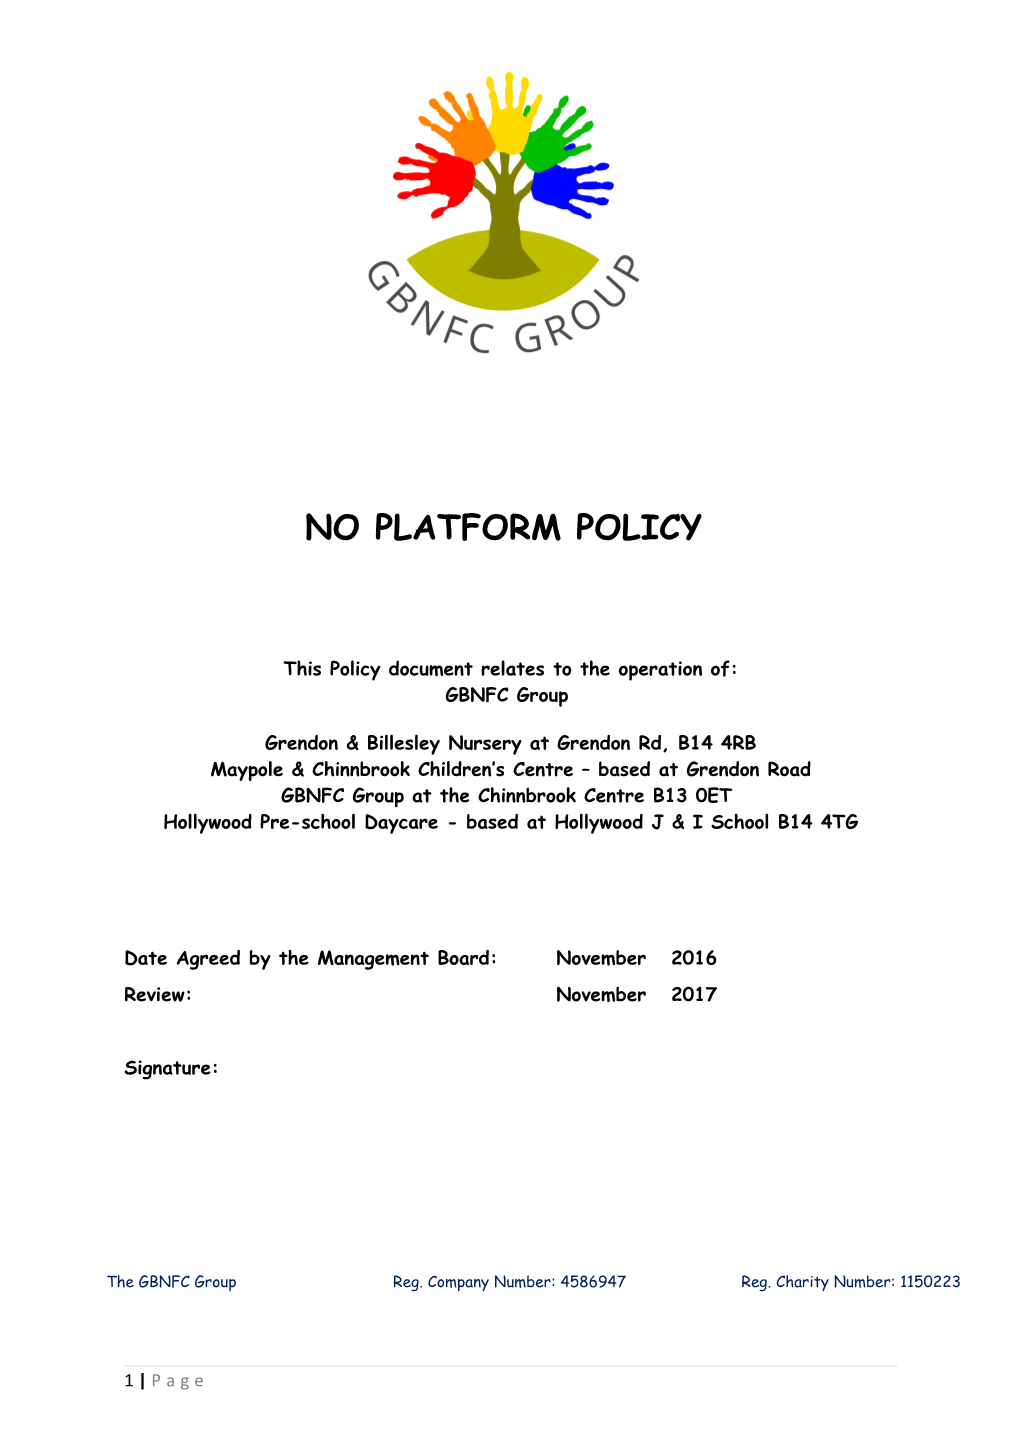 This Policy Document Relates to the Operation Of